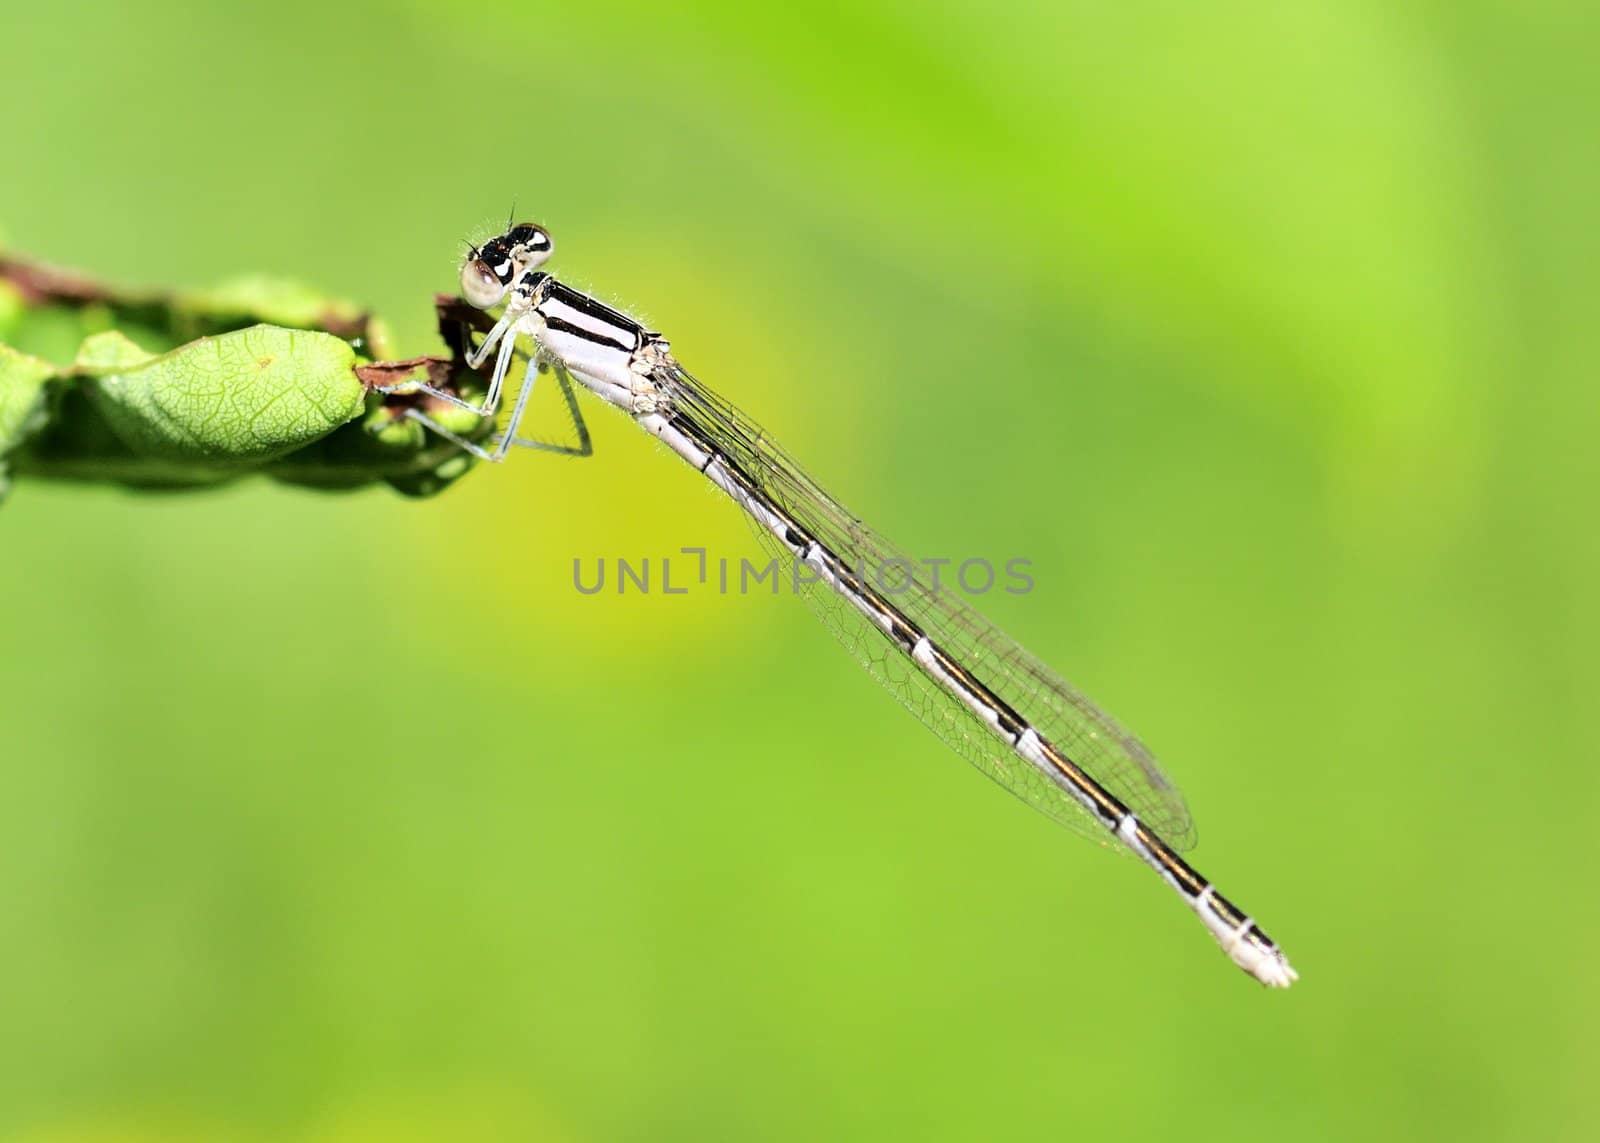 A damsel fly perched on a plant.